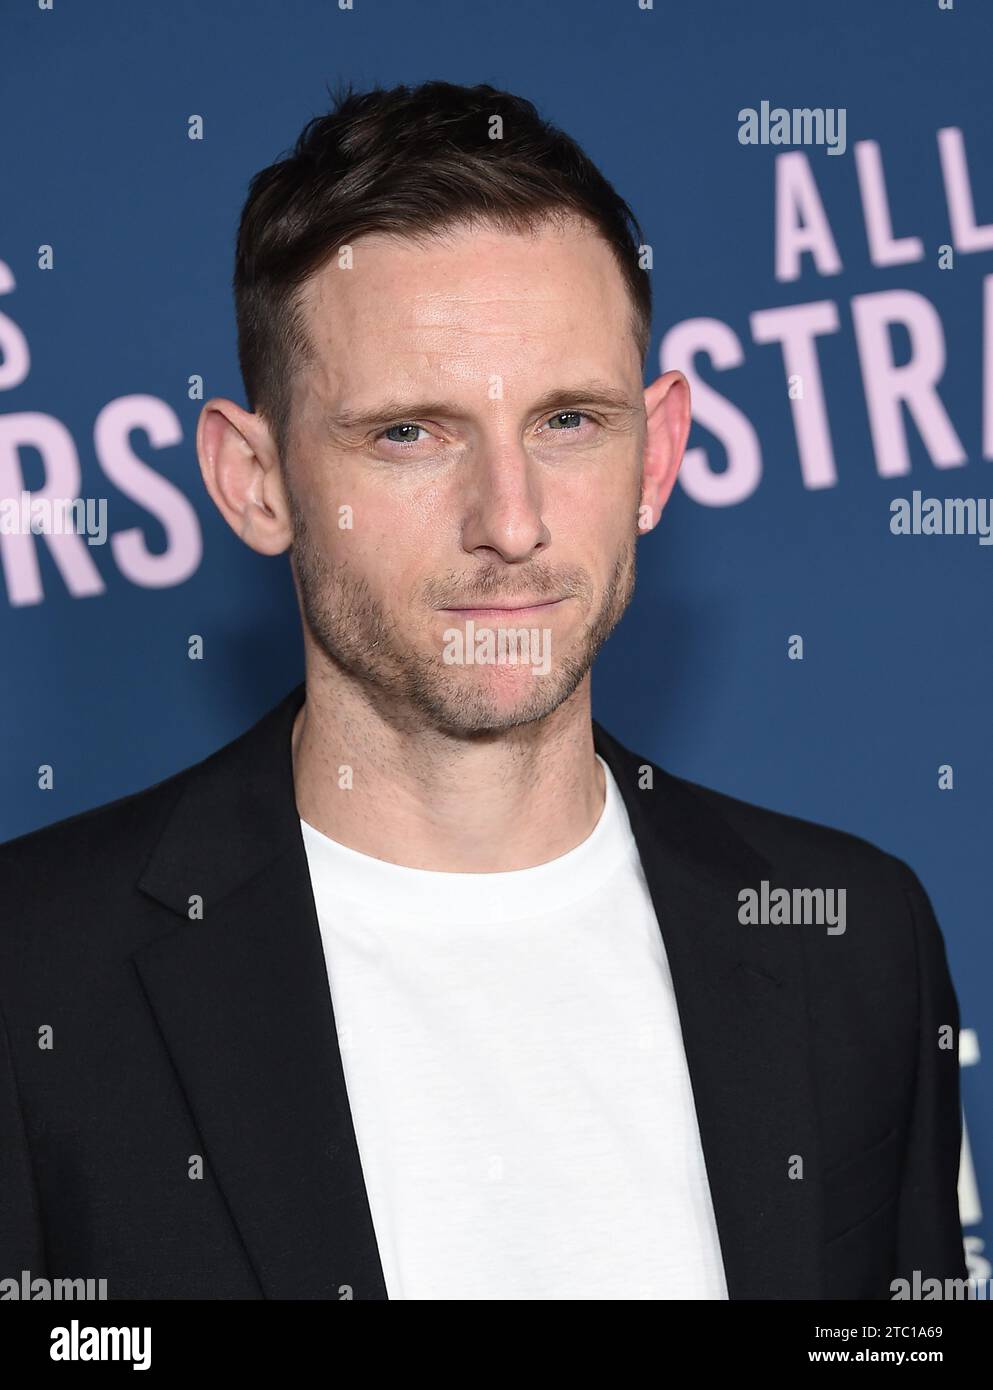 Los Angeles, USA. 09th Dec, 2023. Jamie Bell arriving at the “All Of Us ...